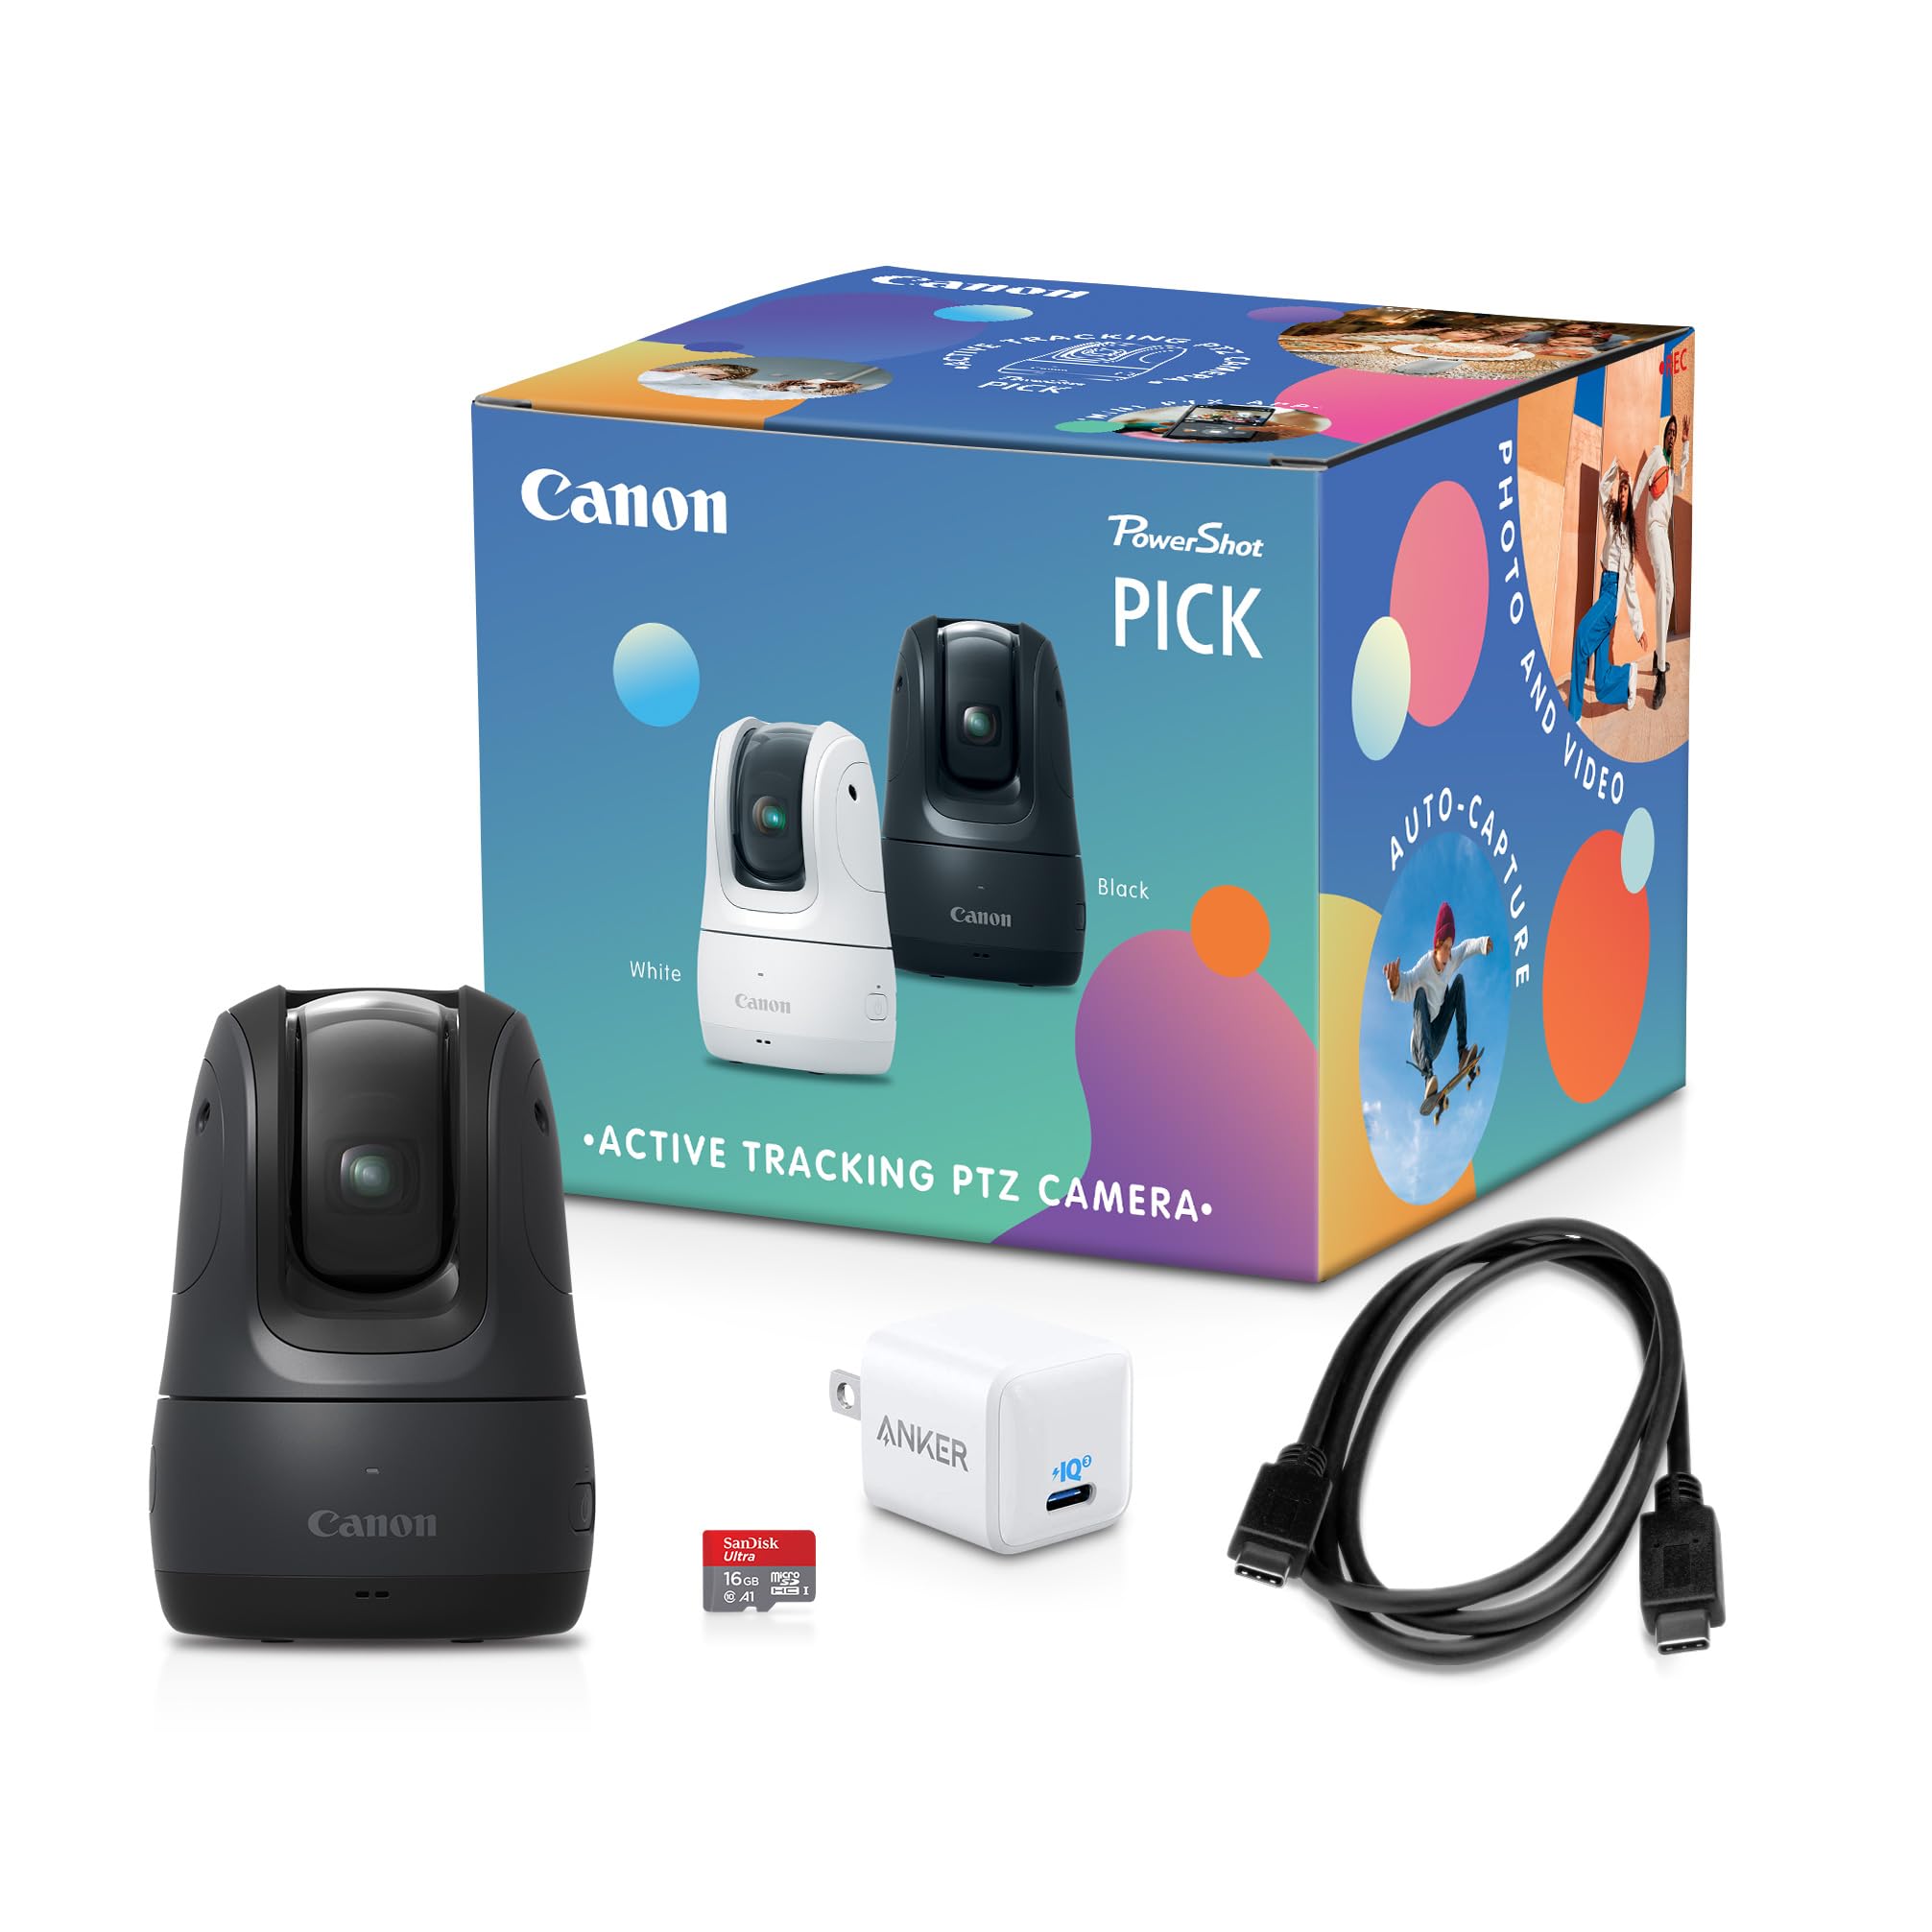 Canon PowerShot Pick Active Subject Tracking PTZ 11.7MP Digital Camera w/ Anker PowerPort Nano USB-C Power Charge, USB-C Cable, & 16GB MicroSD (Black or White) $126 + Free Shipping